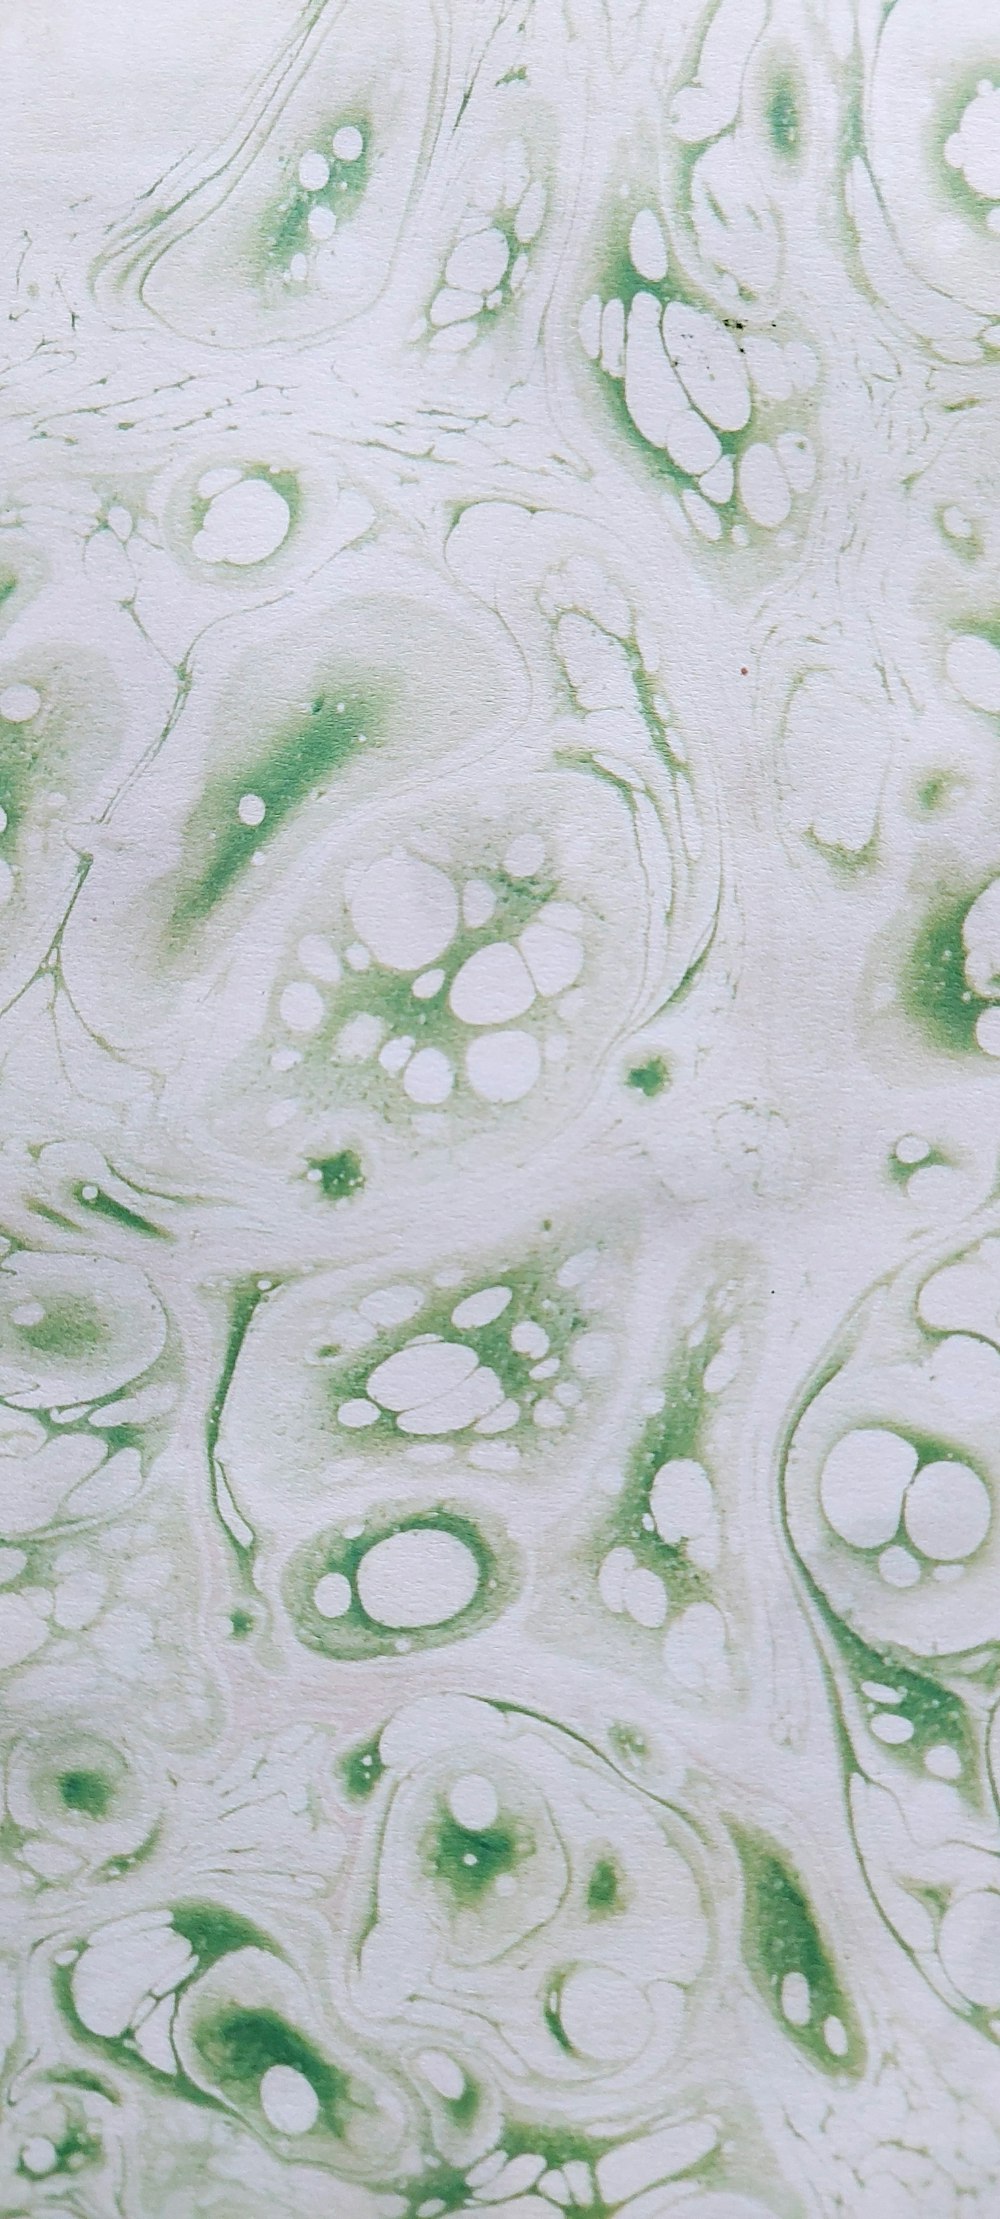 a close up of a green and white substance